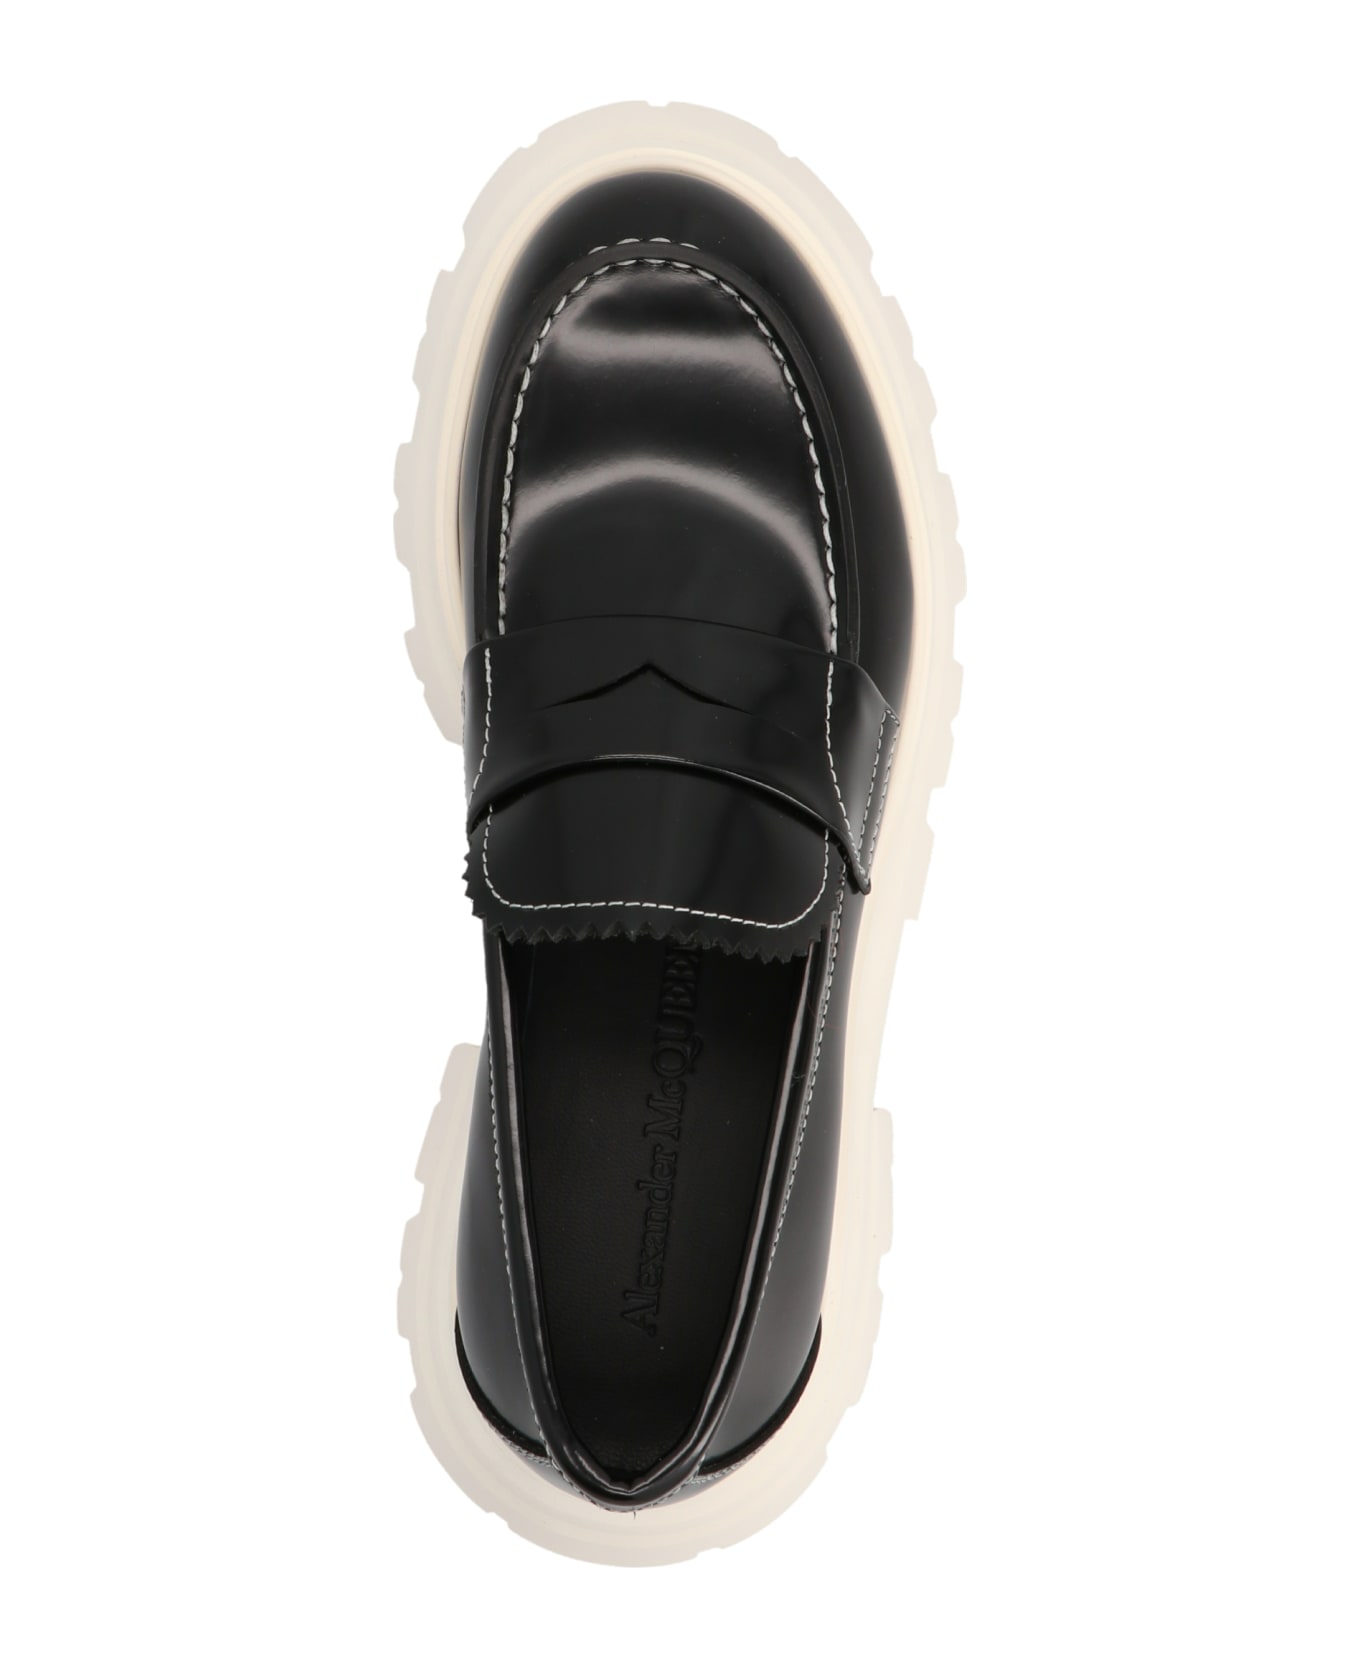 Alexander McQueen Leather Loafers - White/Black